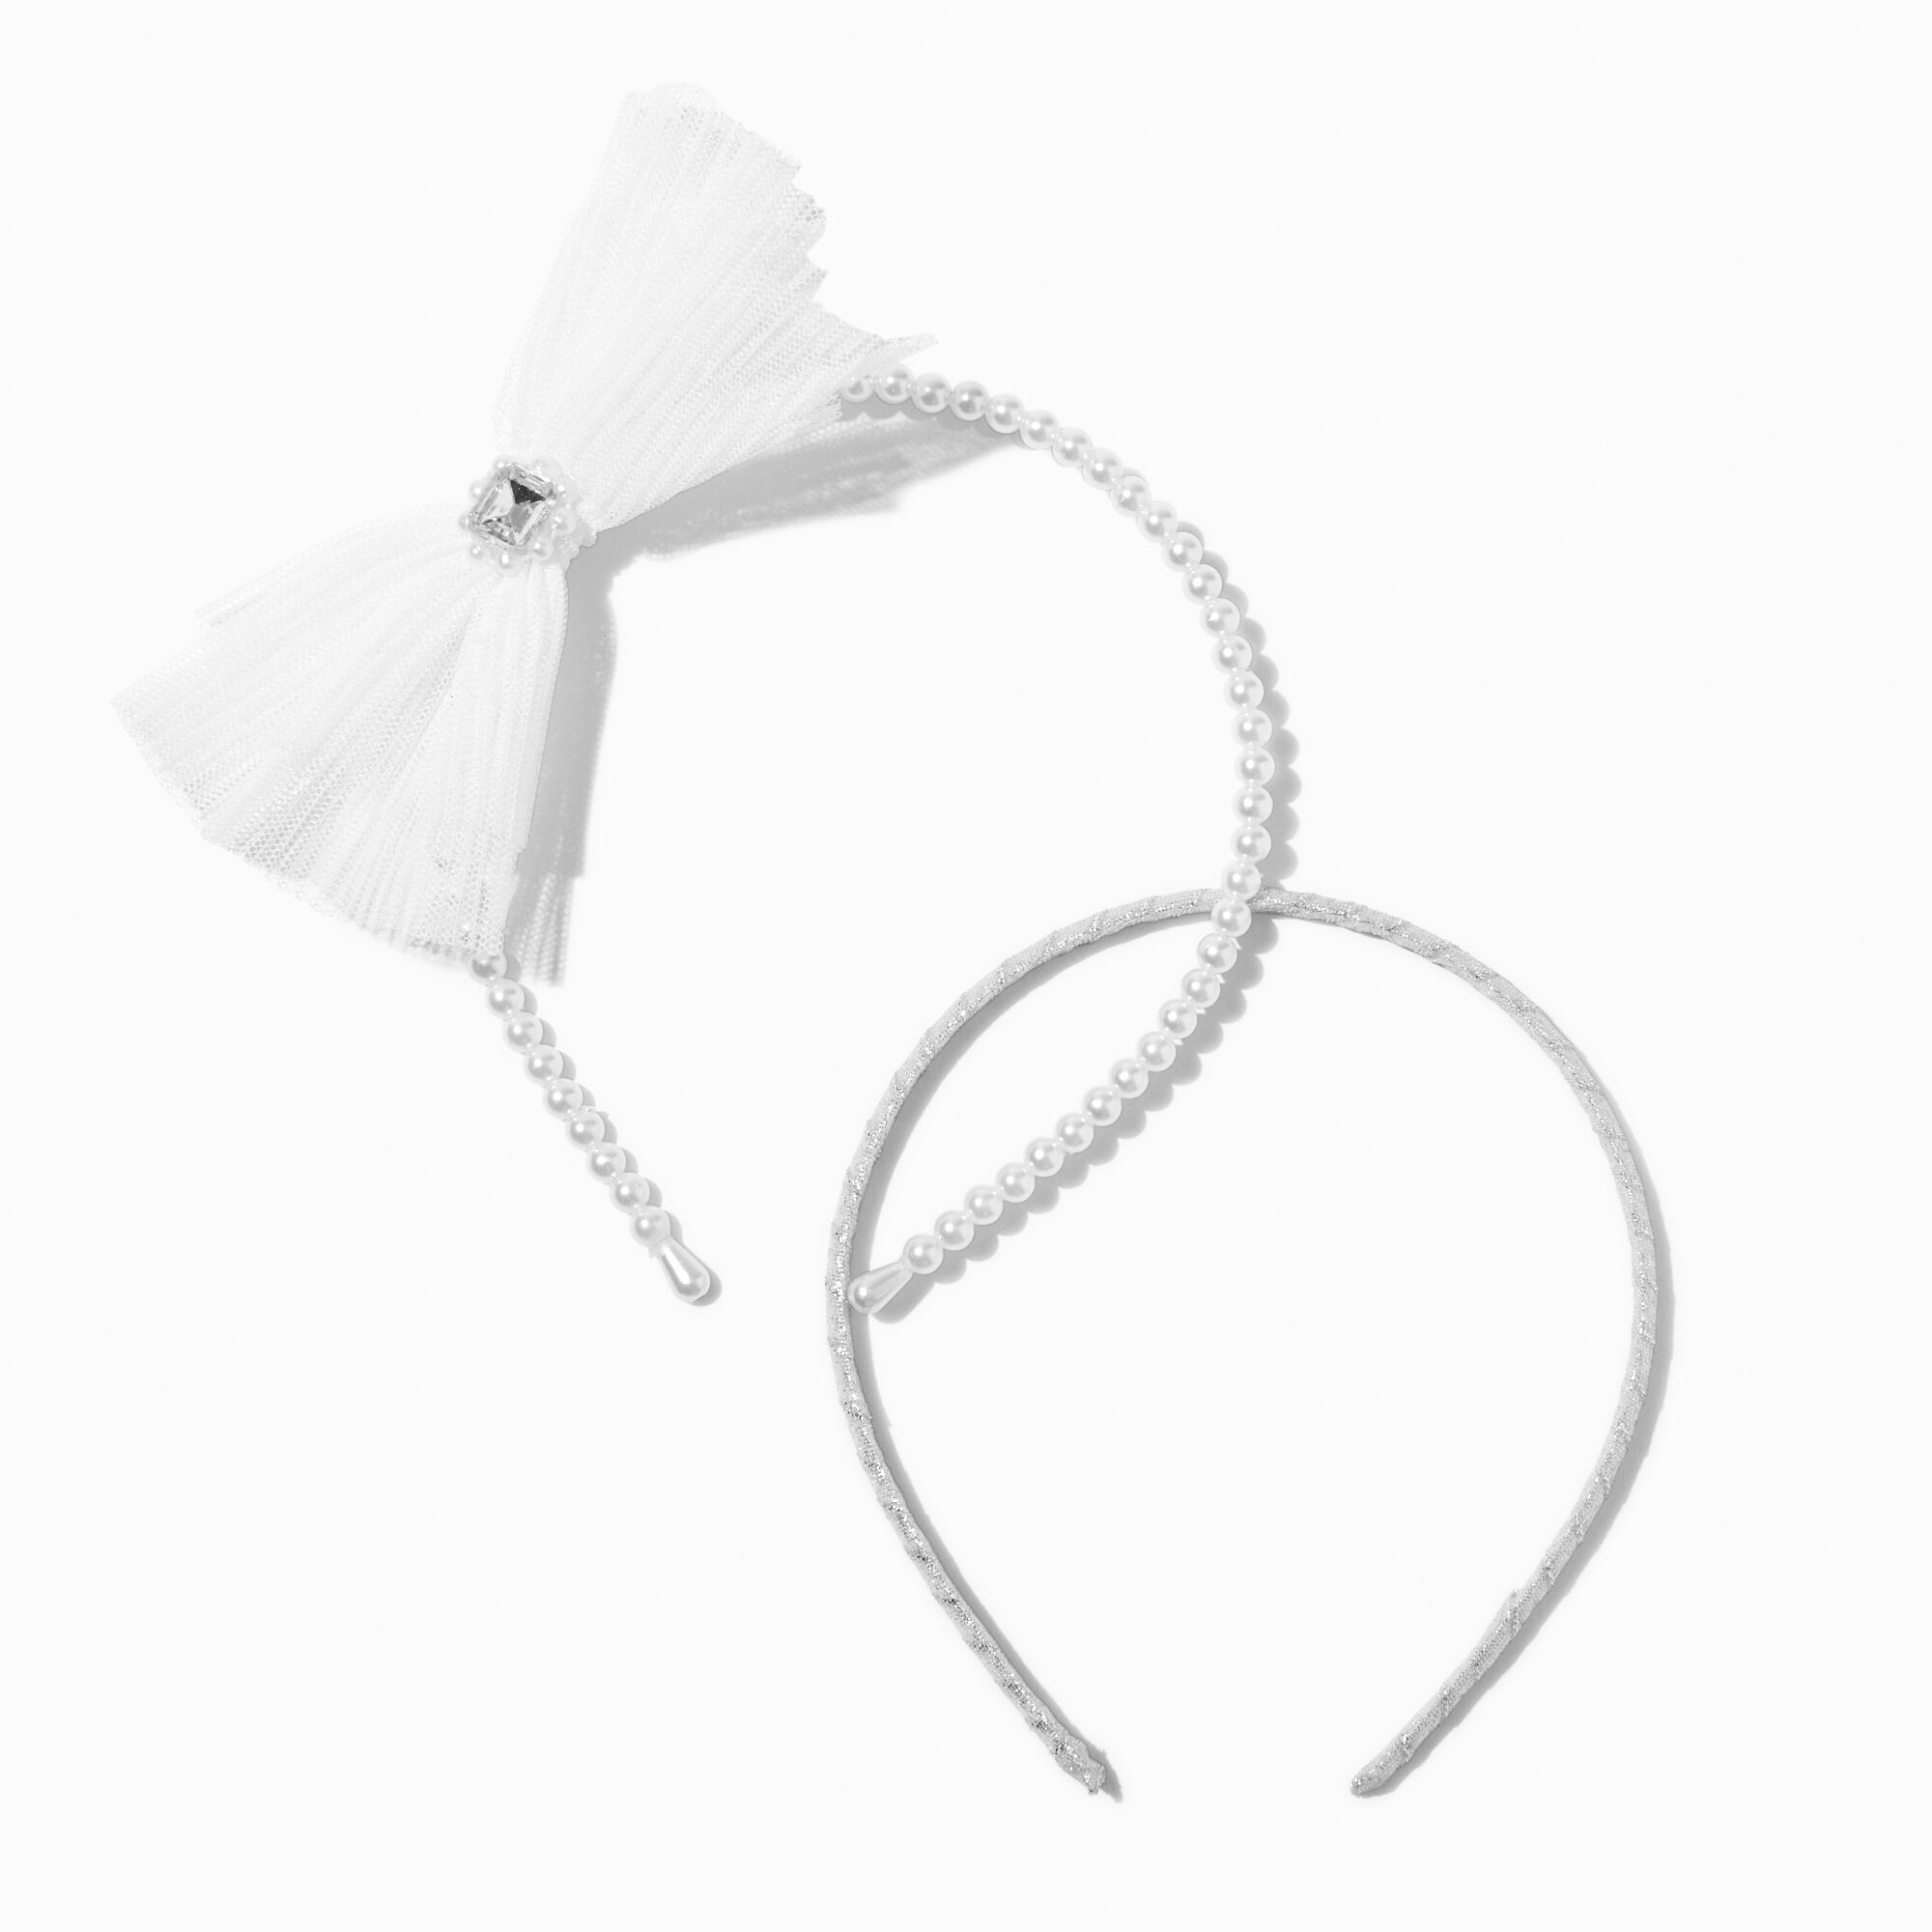 View Claires Club Bow Pearl Headbands 2 Pack White information